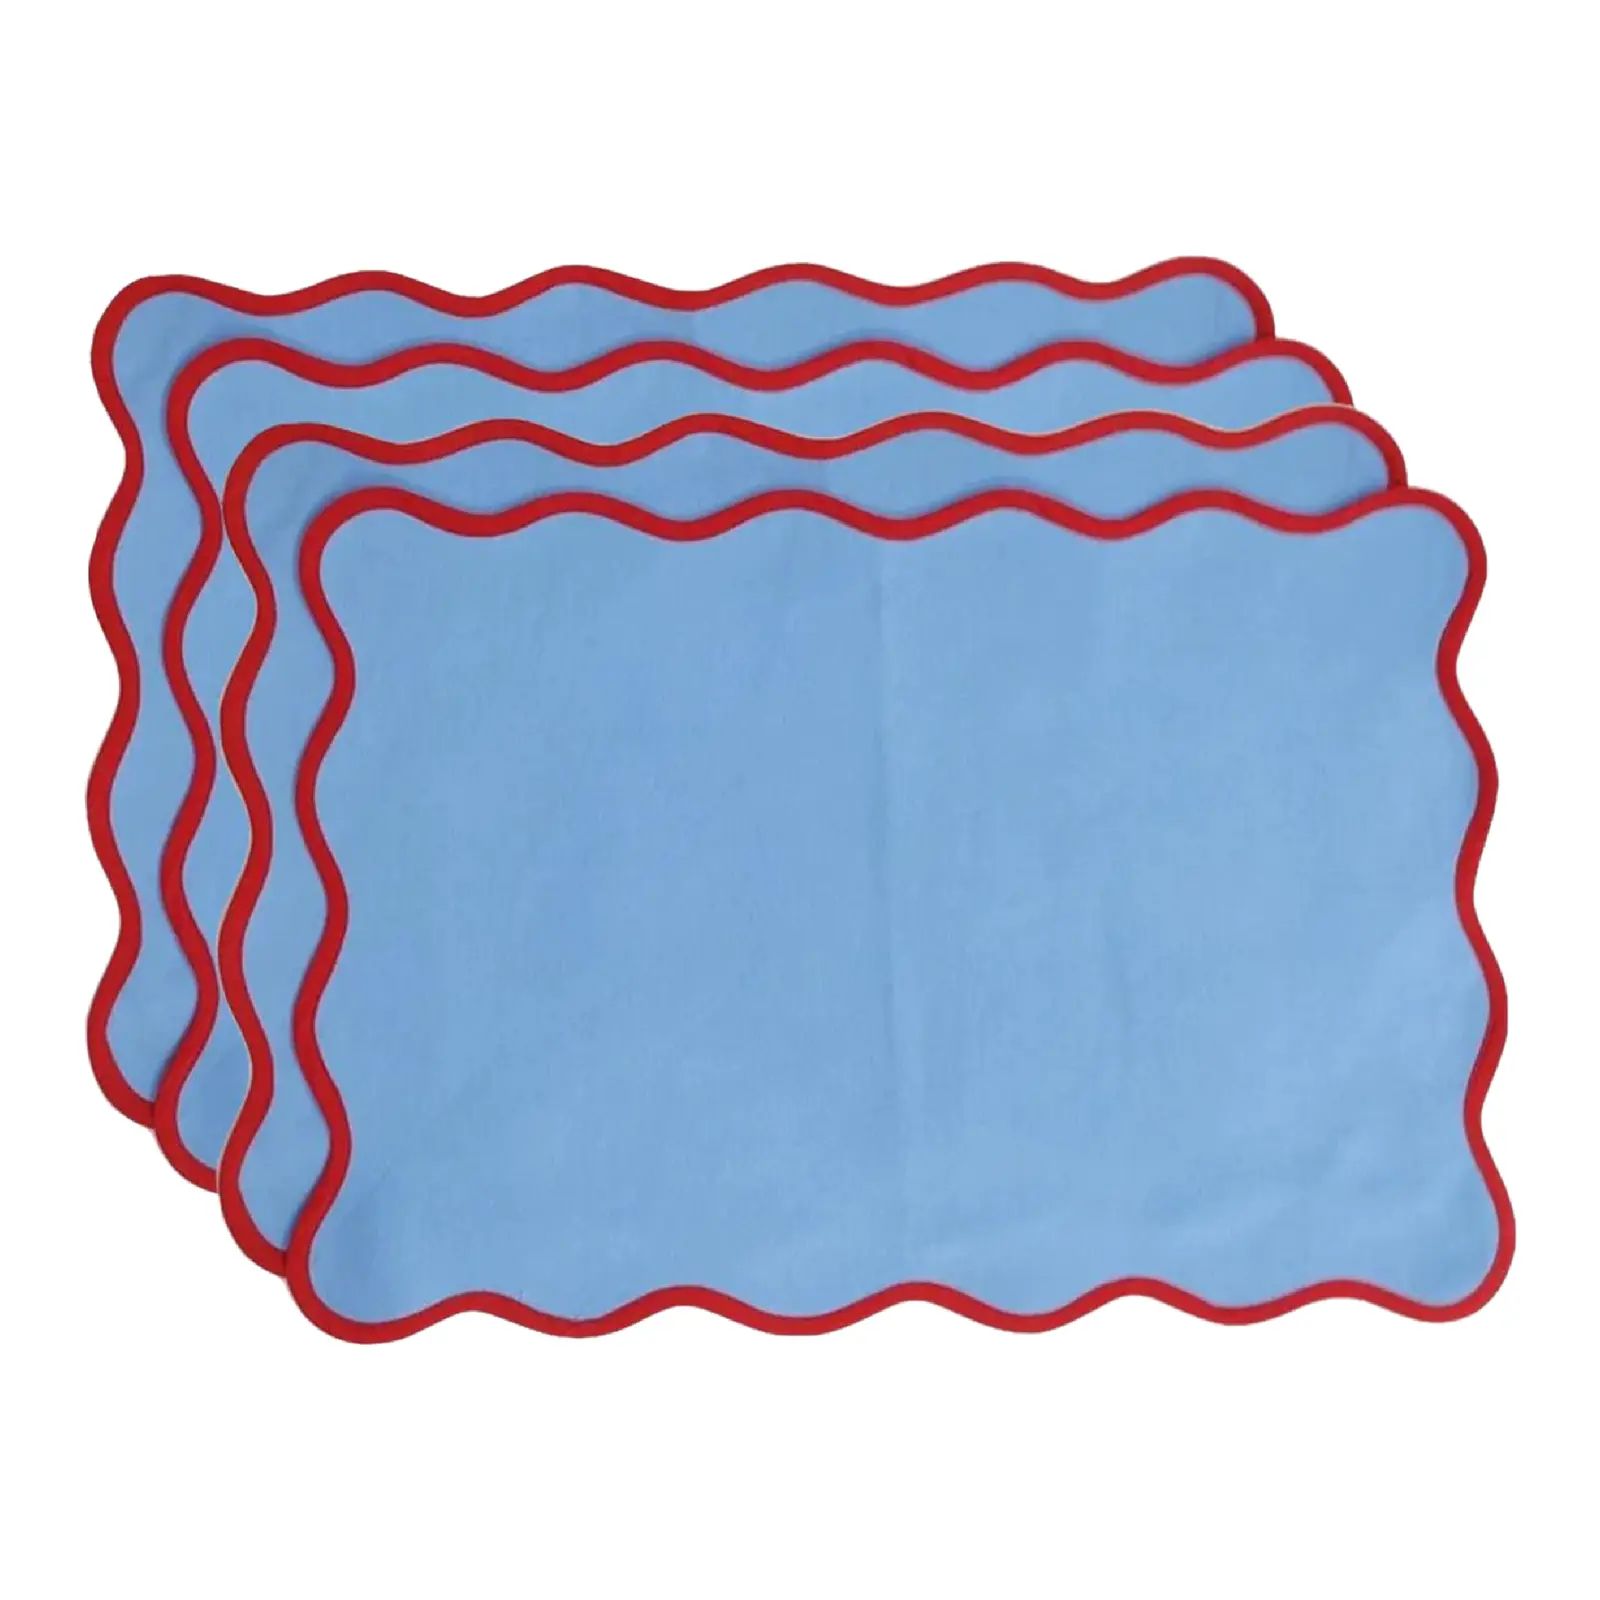 Handmade Scalloped Placemats, Light Blue with Red Piping - Set of 4 | Chairish